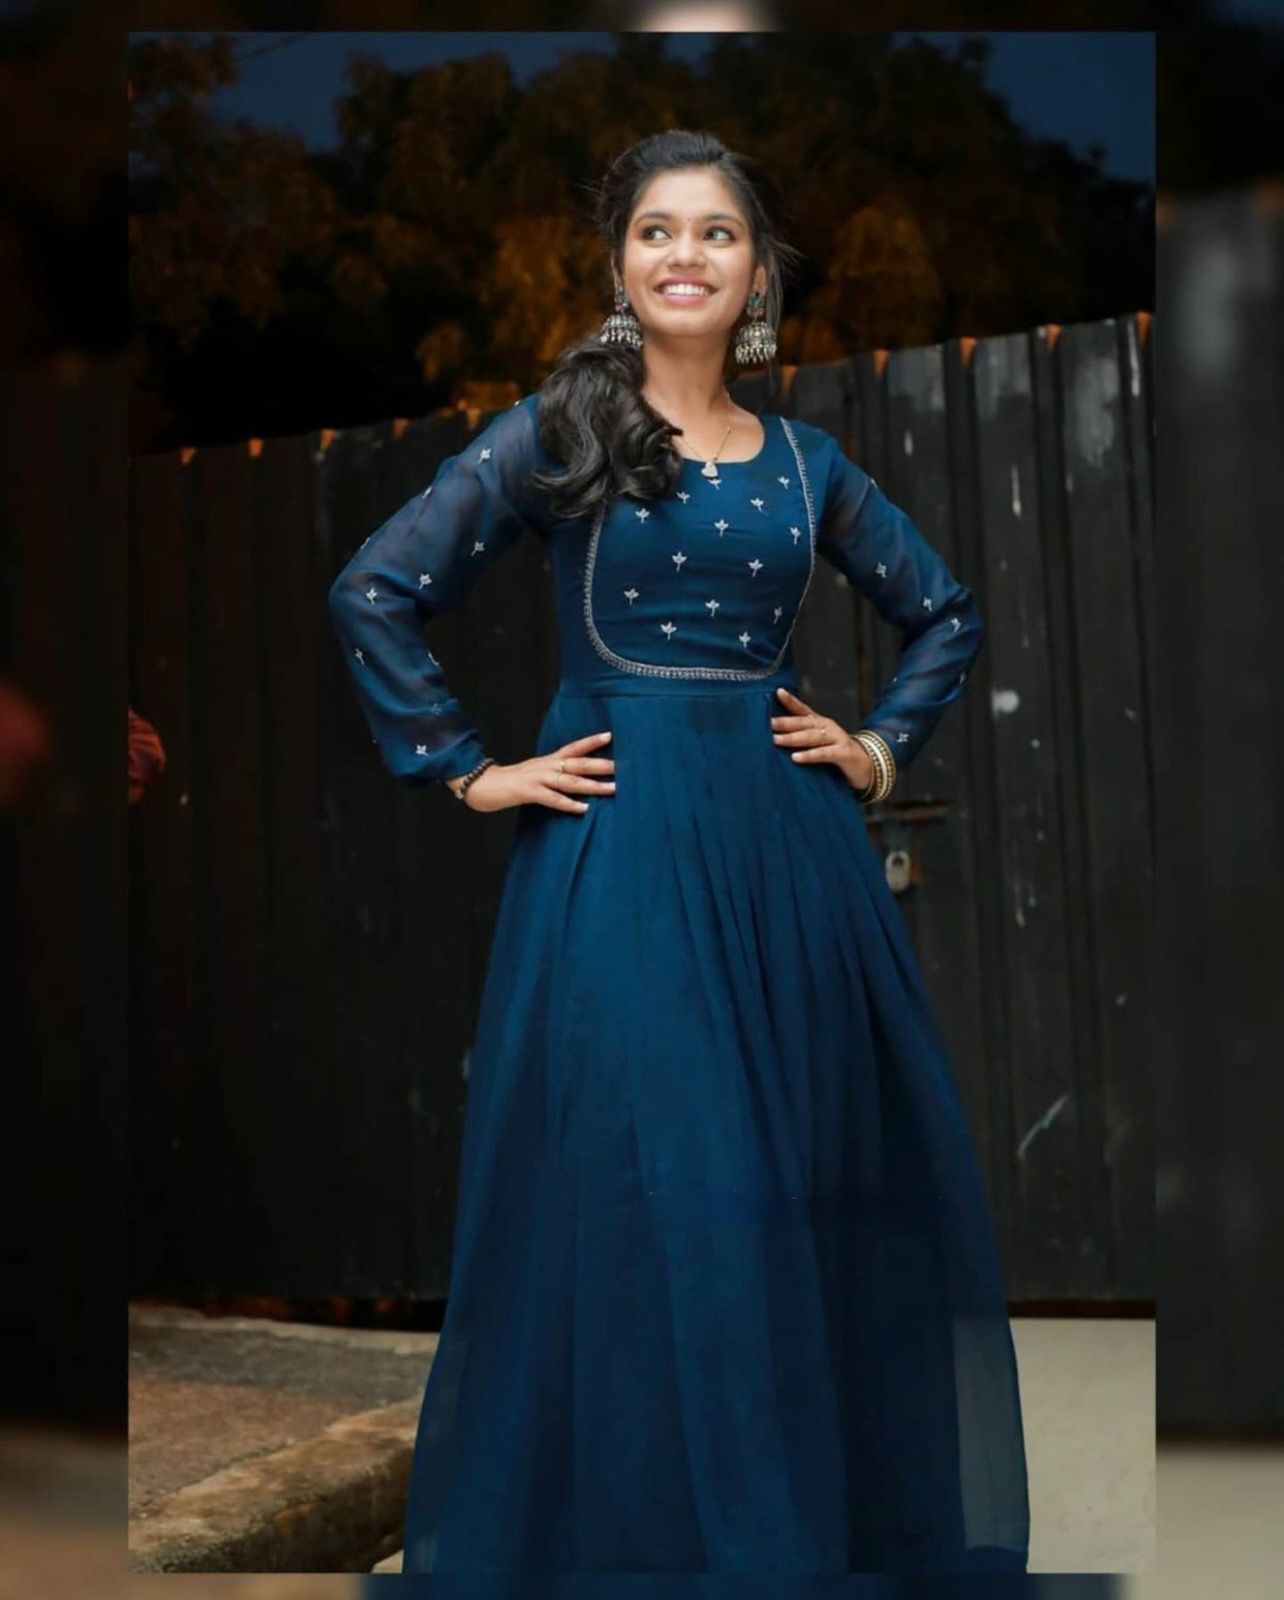 HIRWA SAINA BACK NECK PATTERN STYLE LONG GOWN KURTIS PLUS SIZE WITH 50 PLUS  LENGTH at Rs 575 | Long Gowns in Surat | ID: 2853005830948